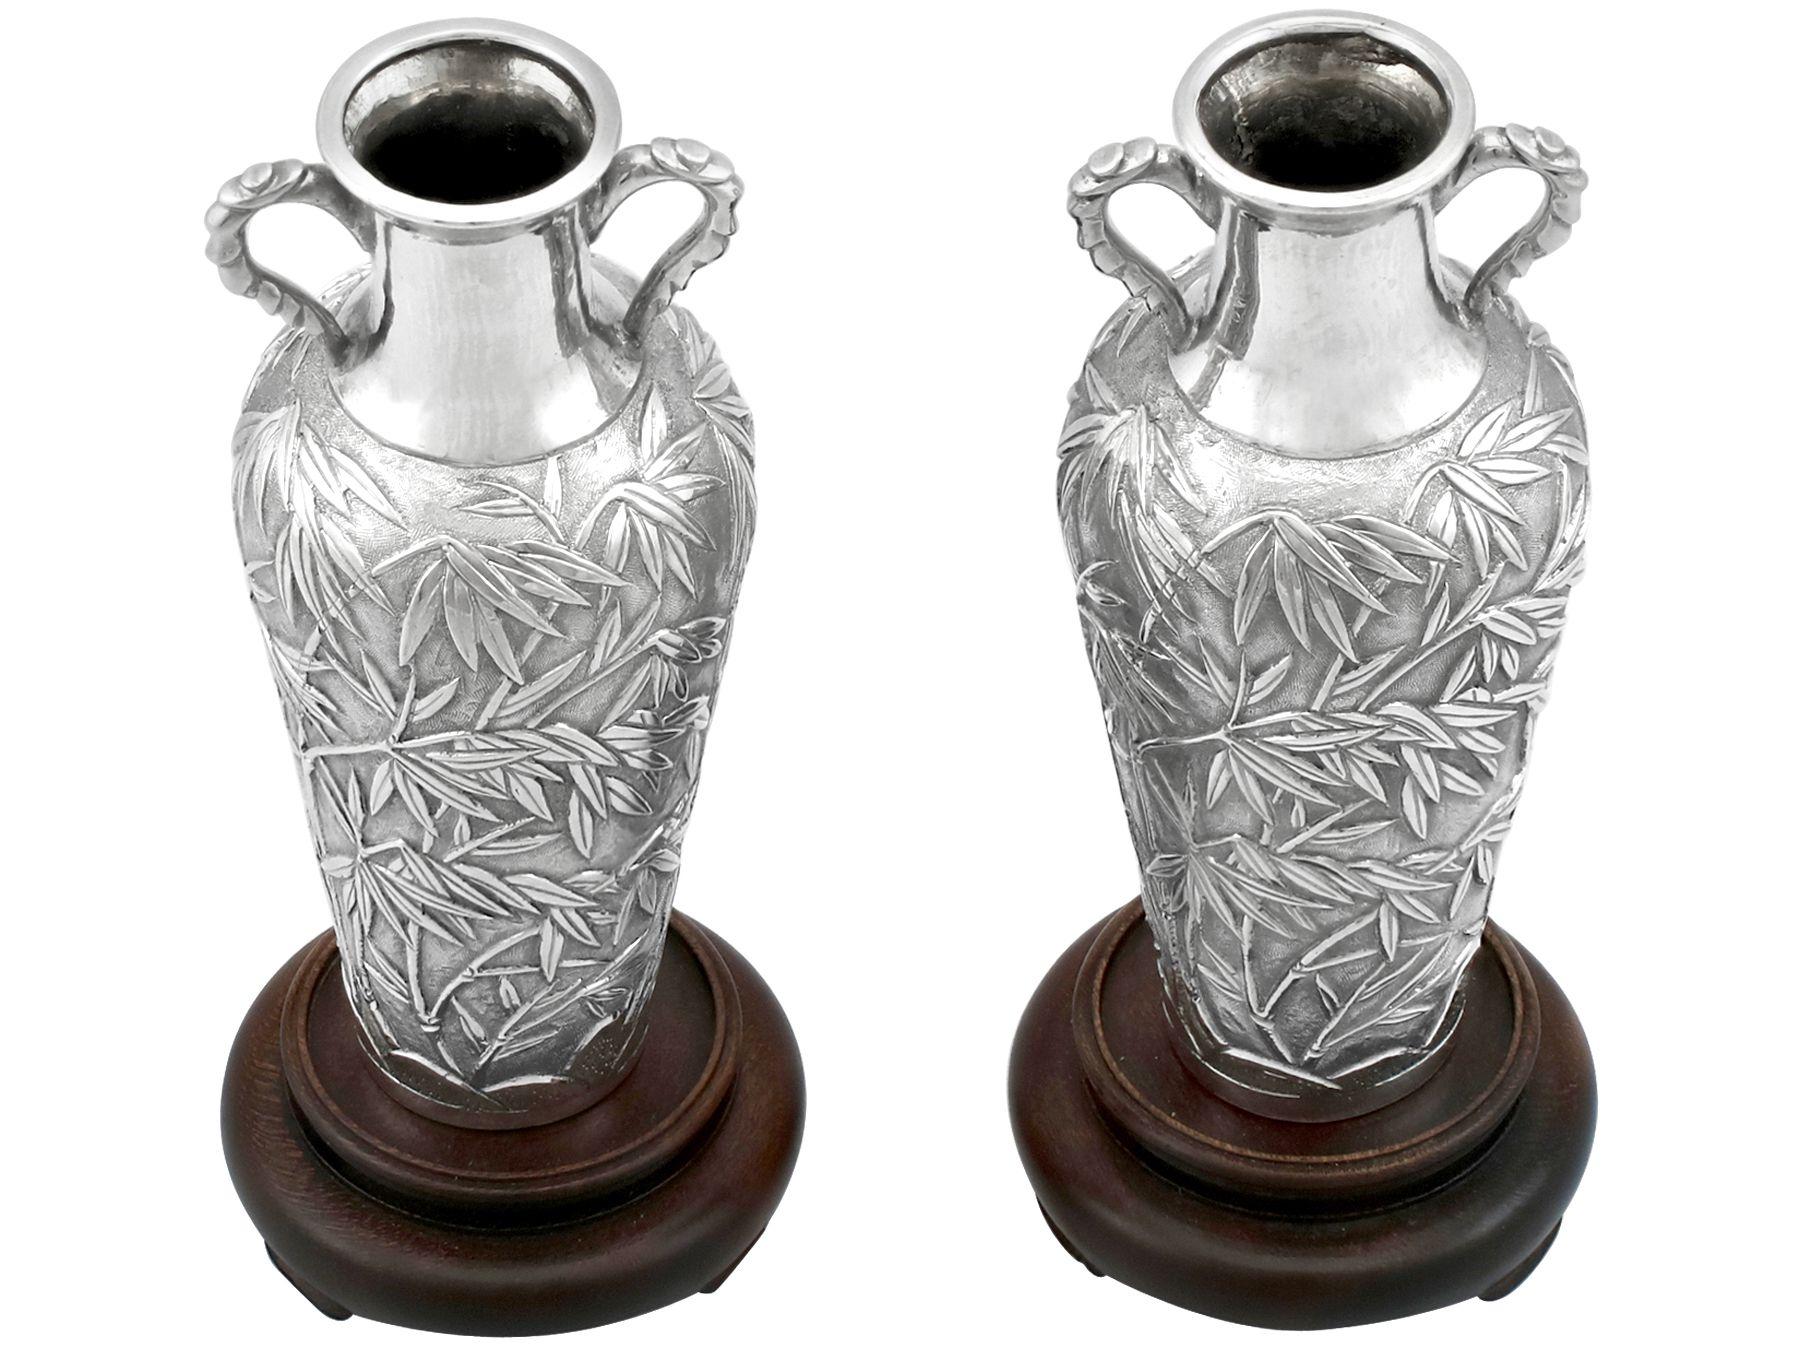 Antique Chinese Export Silver and Cherry Wood Vases In Excellent Condition For Sale In Jesmond, Newcastle Upon Tyne